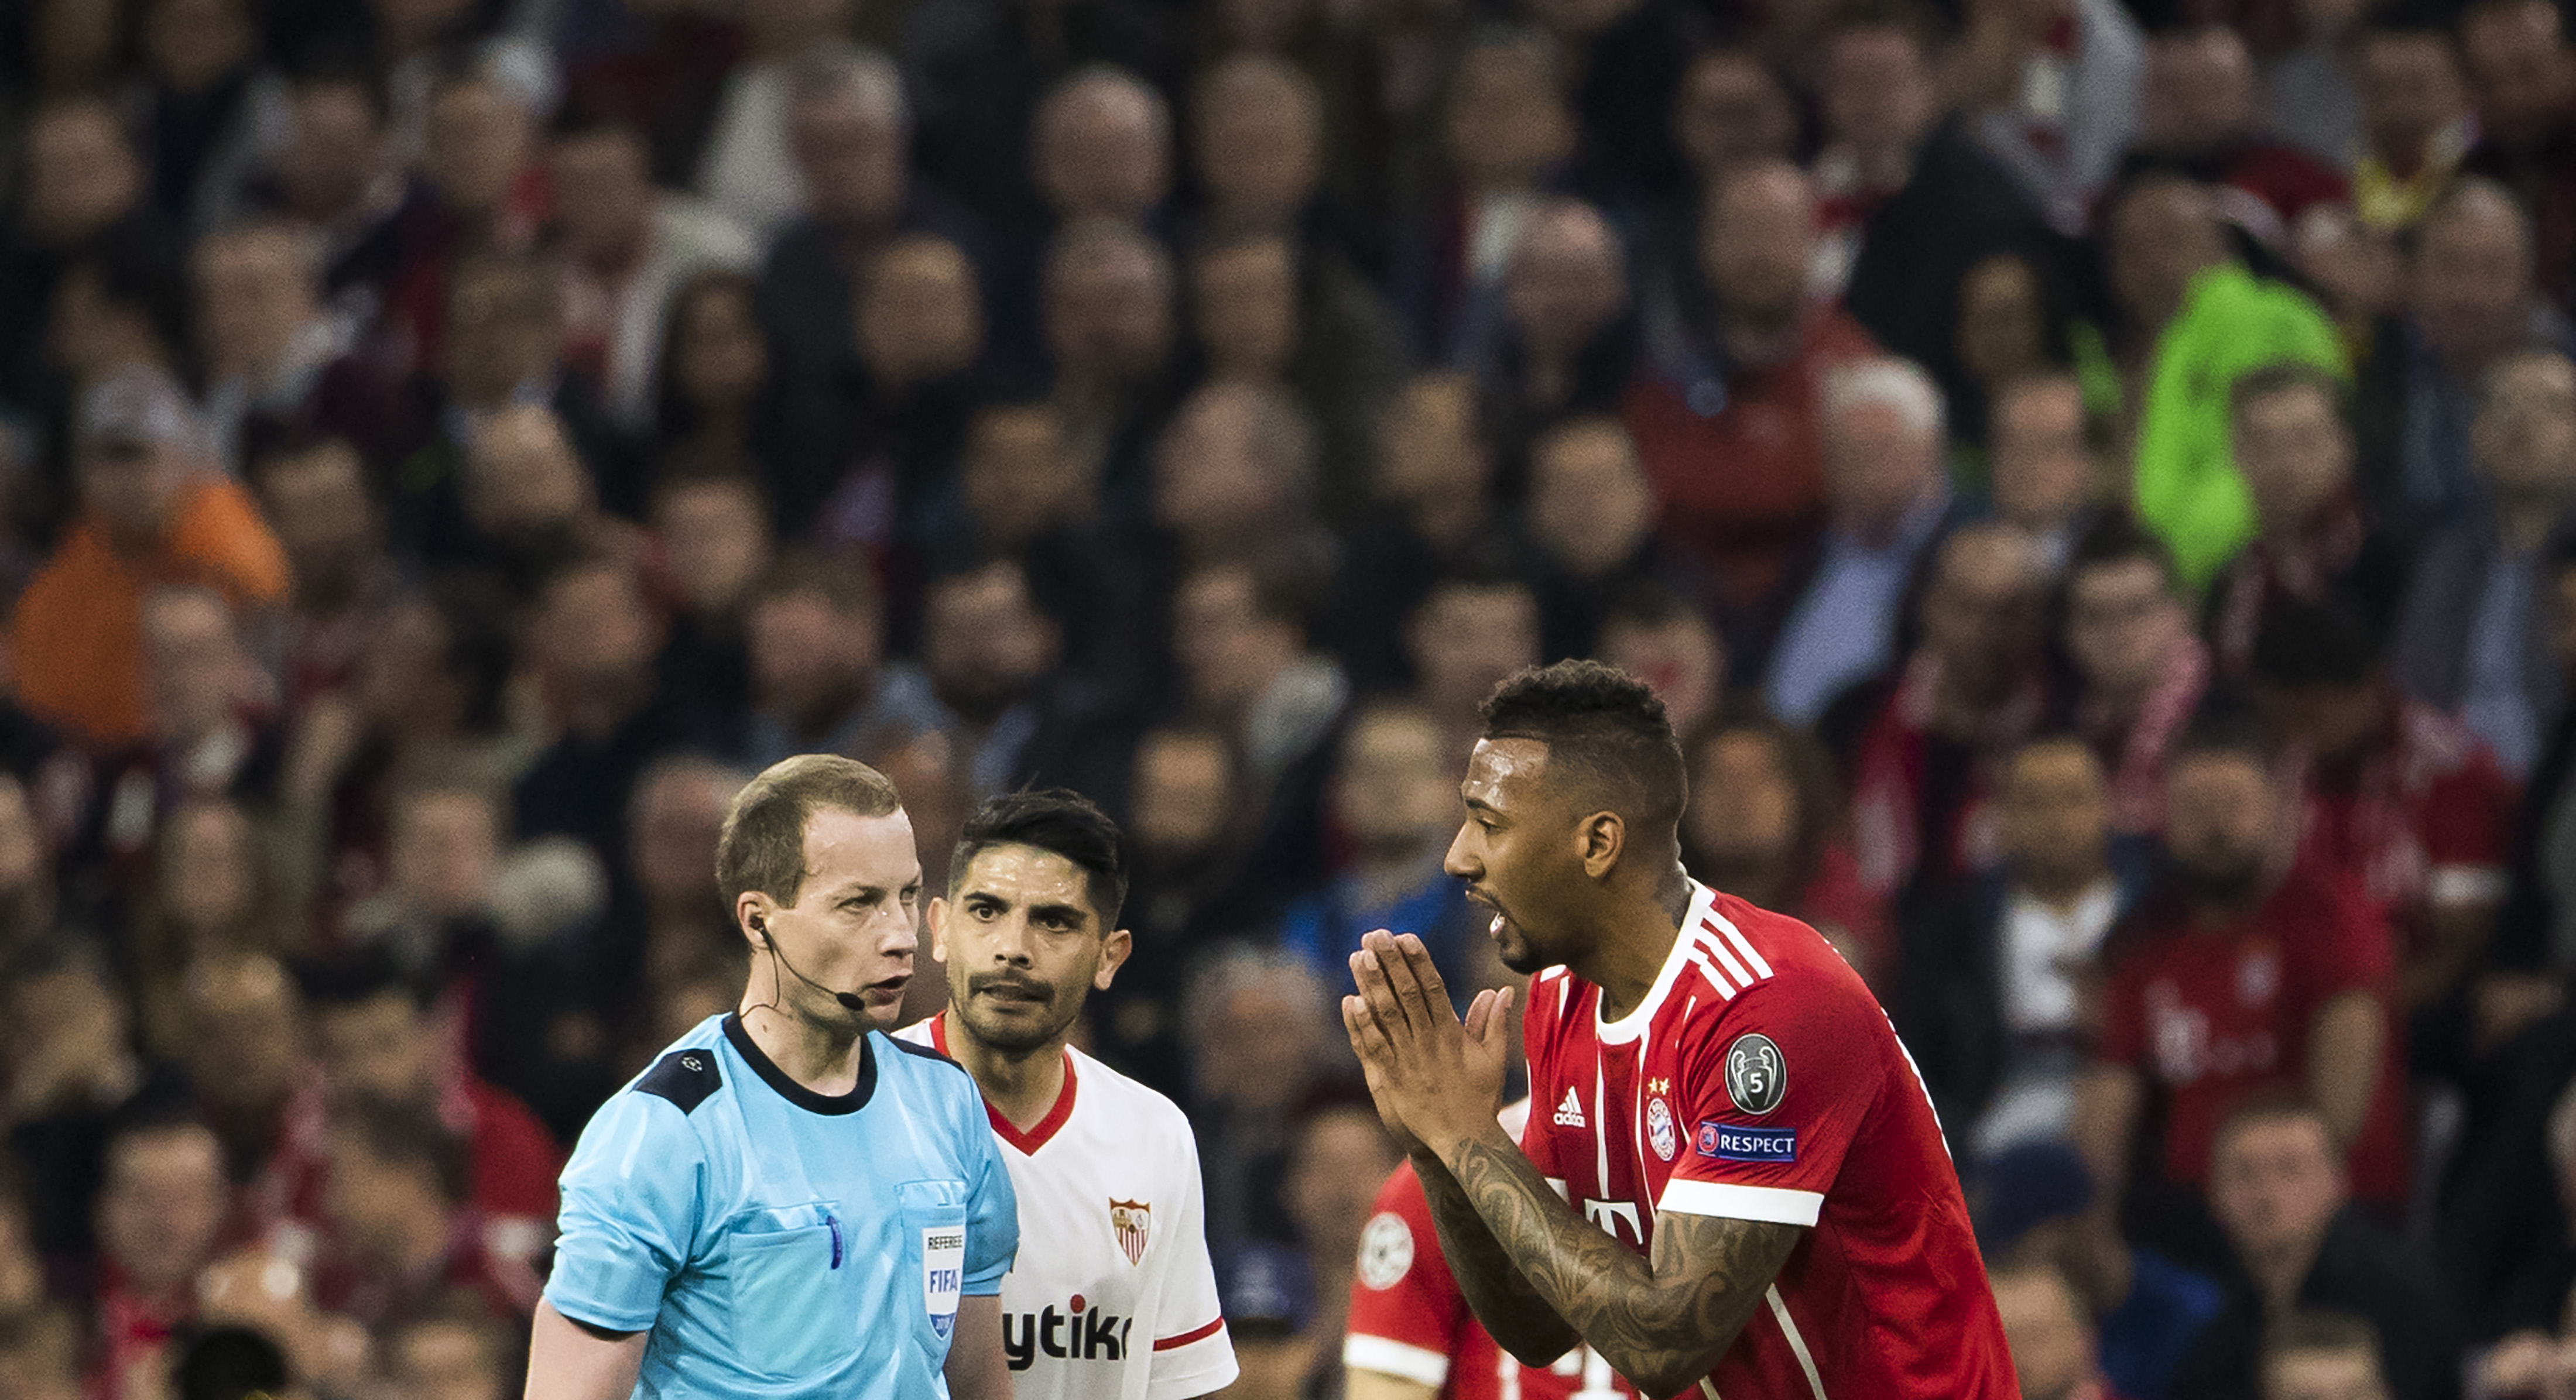 Germany's defender Jerome Boateng (R) pleads with Scottish referee William Collum during the UEFA Champions League quarter-final second leg football match between Bayern Munich and Sevilla FC on April 11, 2018 in Munich, southern Germany. / AFP PHOTO / Odd ANDERSEN        (Photo credit should read ODD ANDERSEN/AFP/Getty Images)